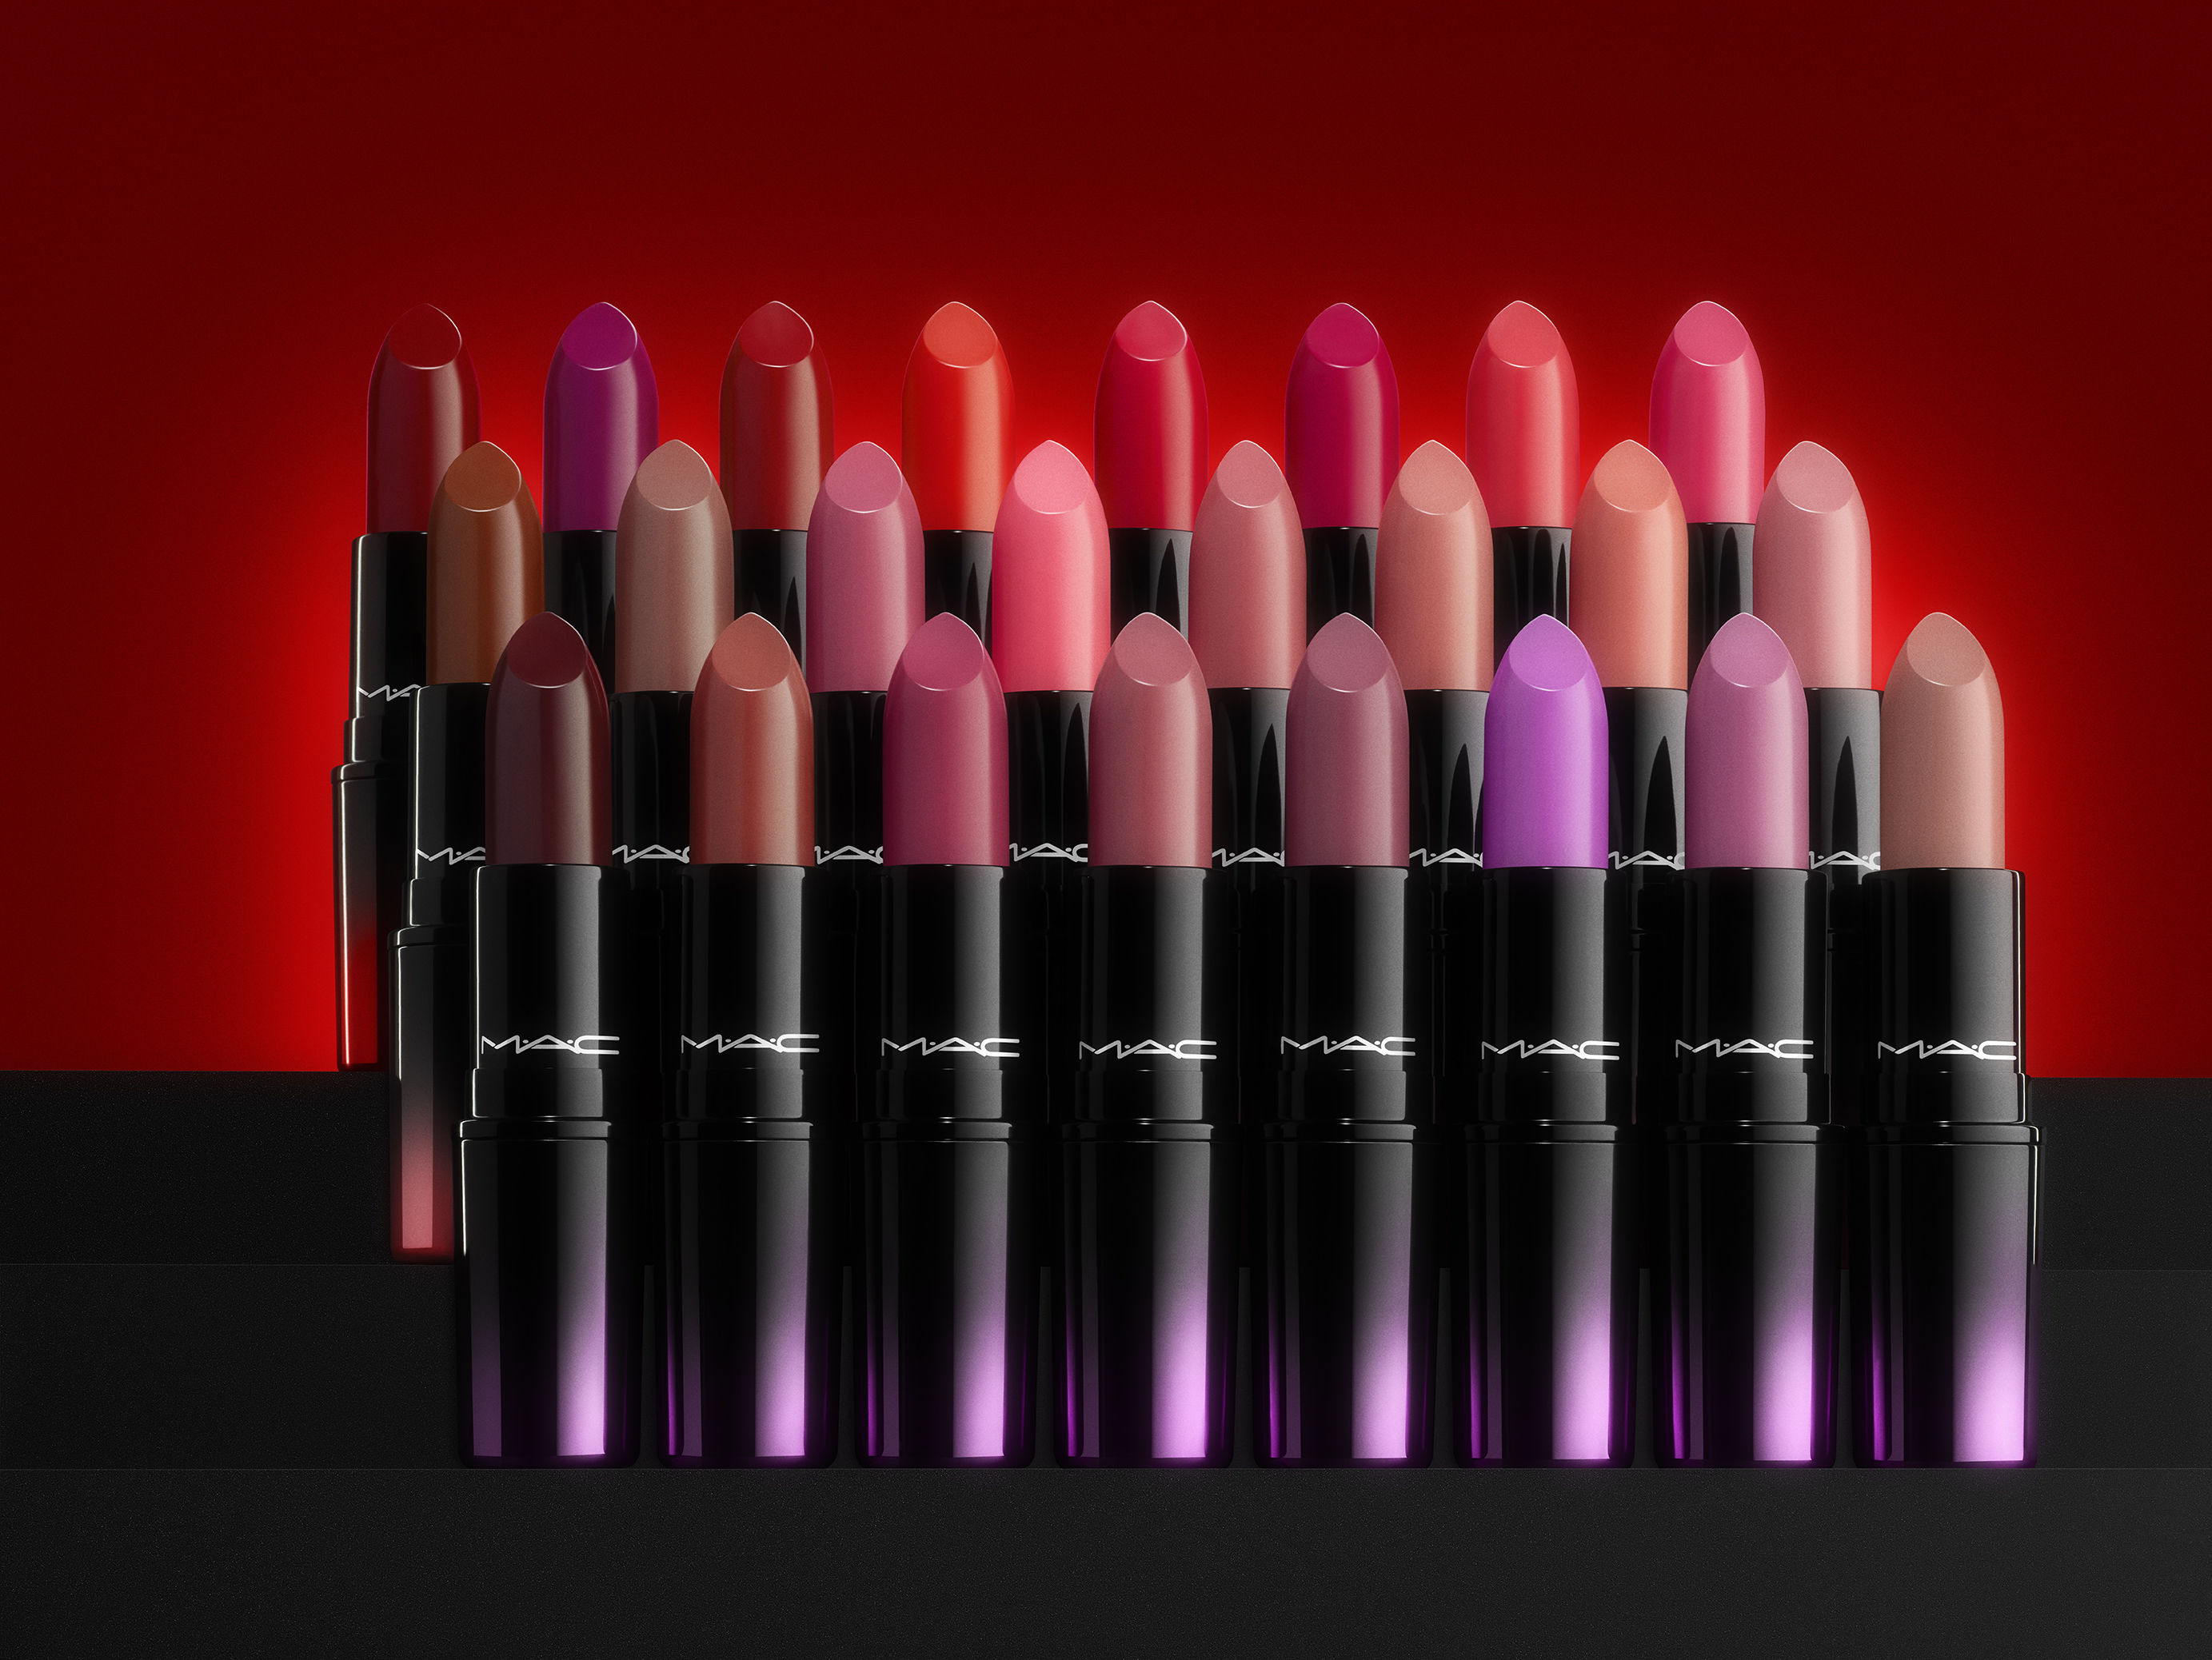 new M.A.C lipsticks are here and we're